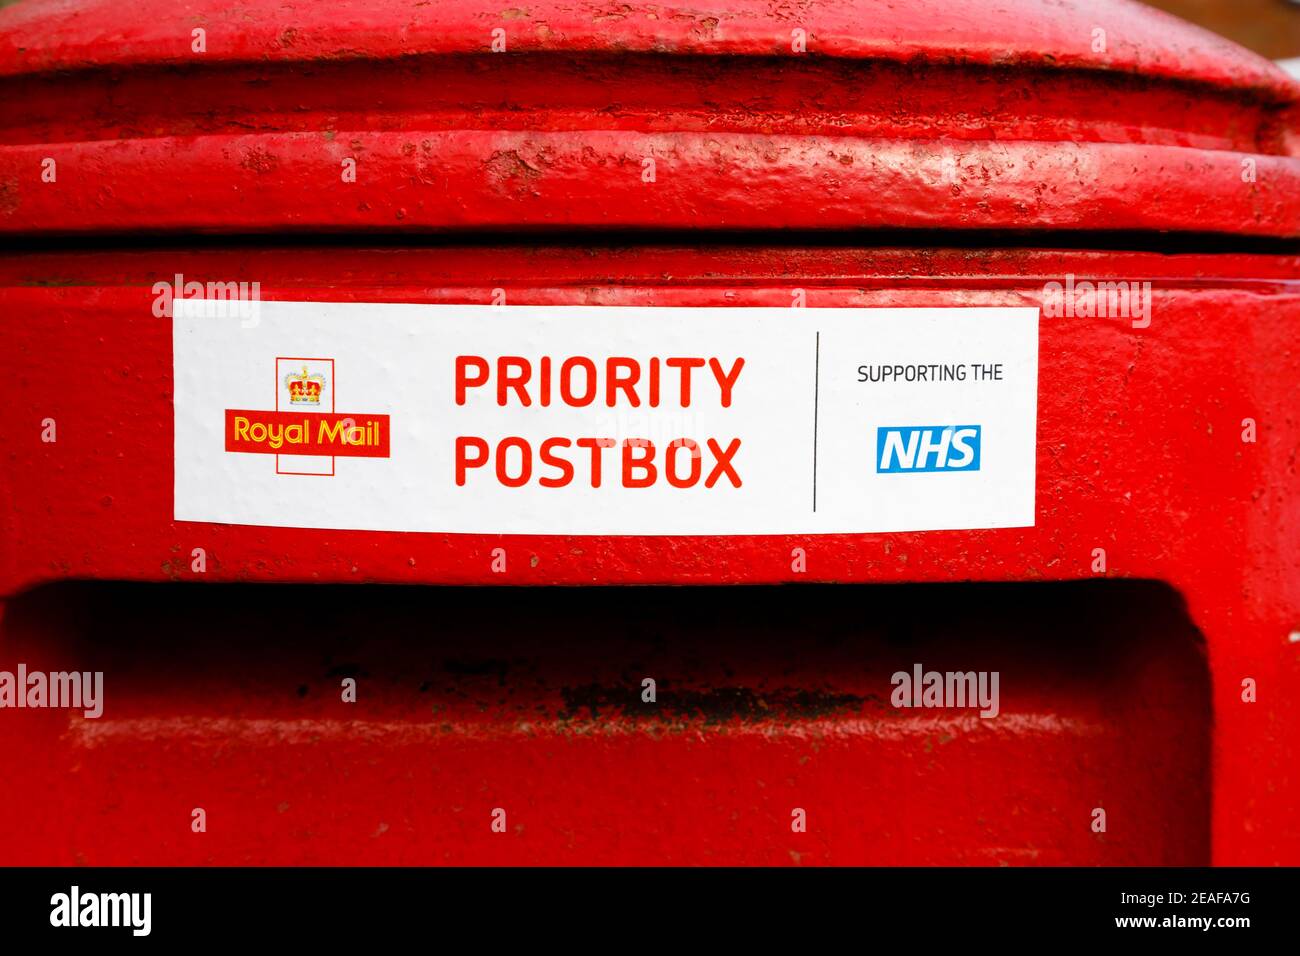 traditional red British royal Mail postbox with sticker. Priority postbox. supporting the NHS during the Covid pandemic of 2020 2021 Stock Photo